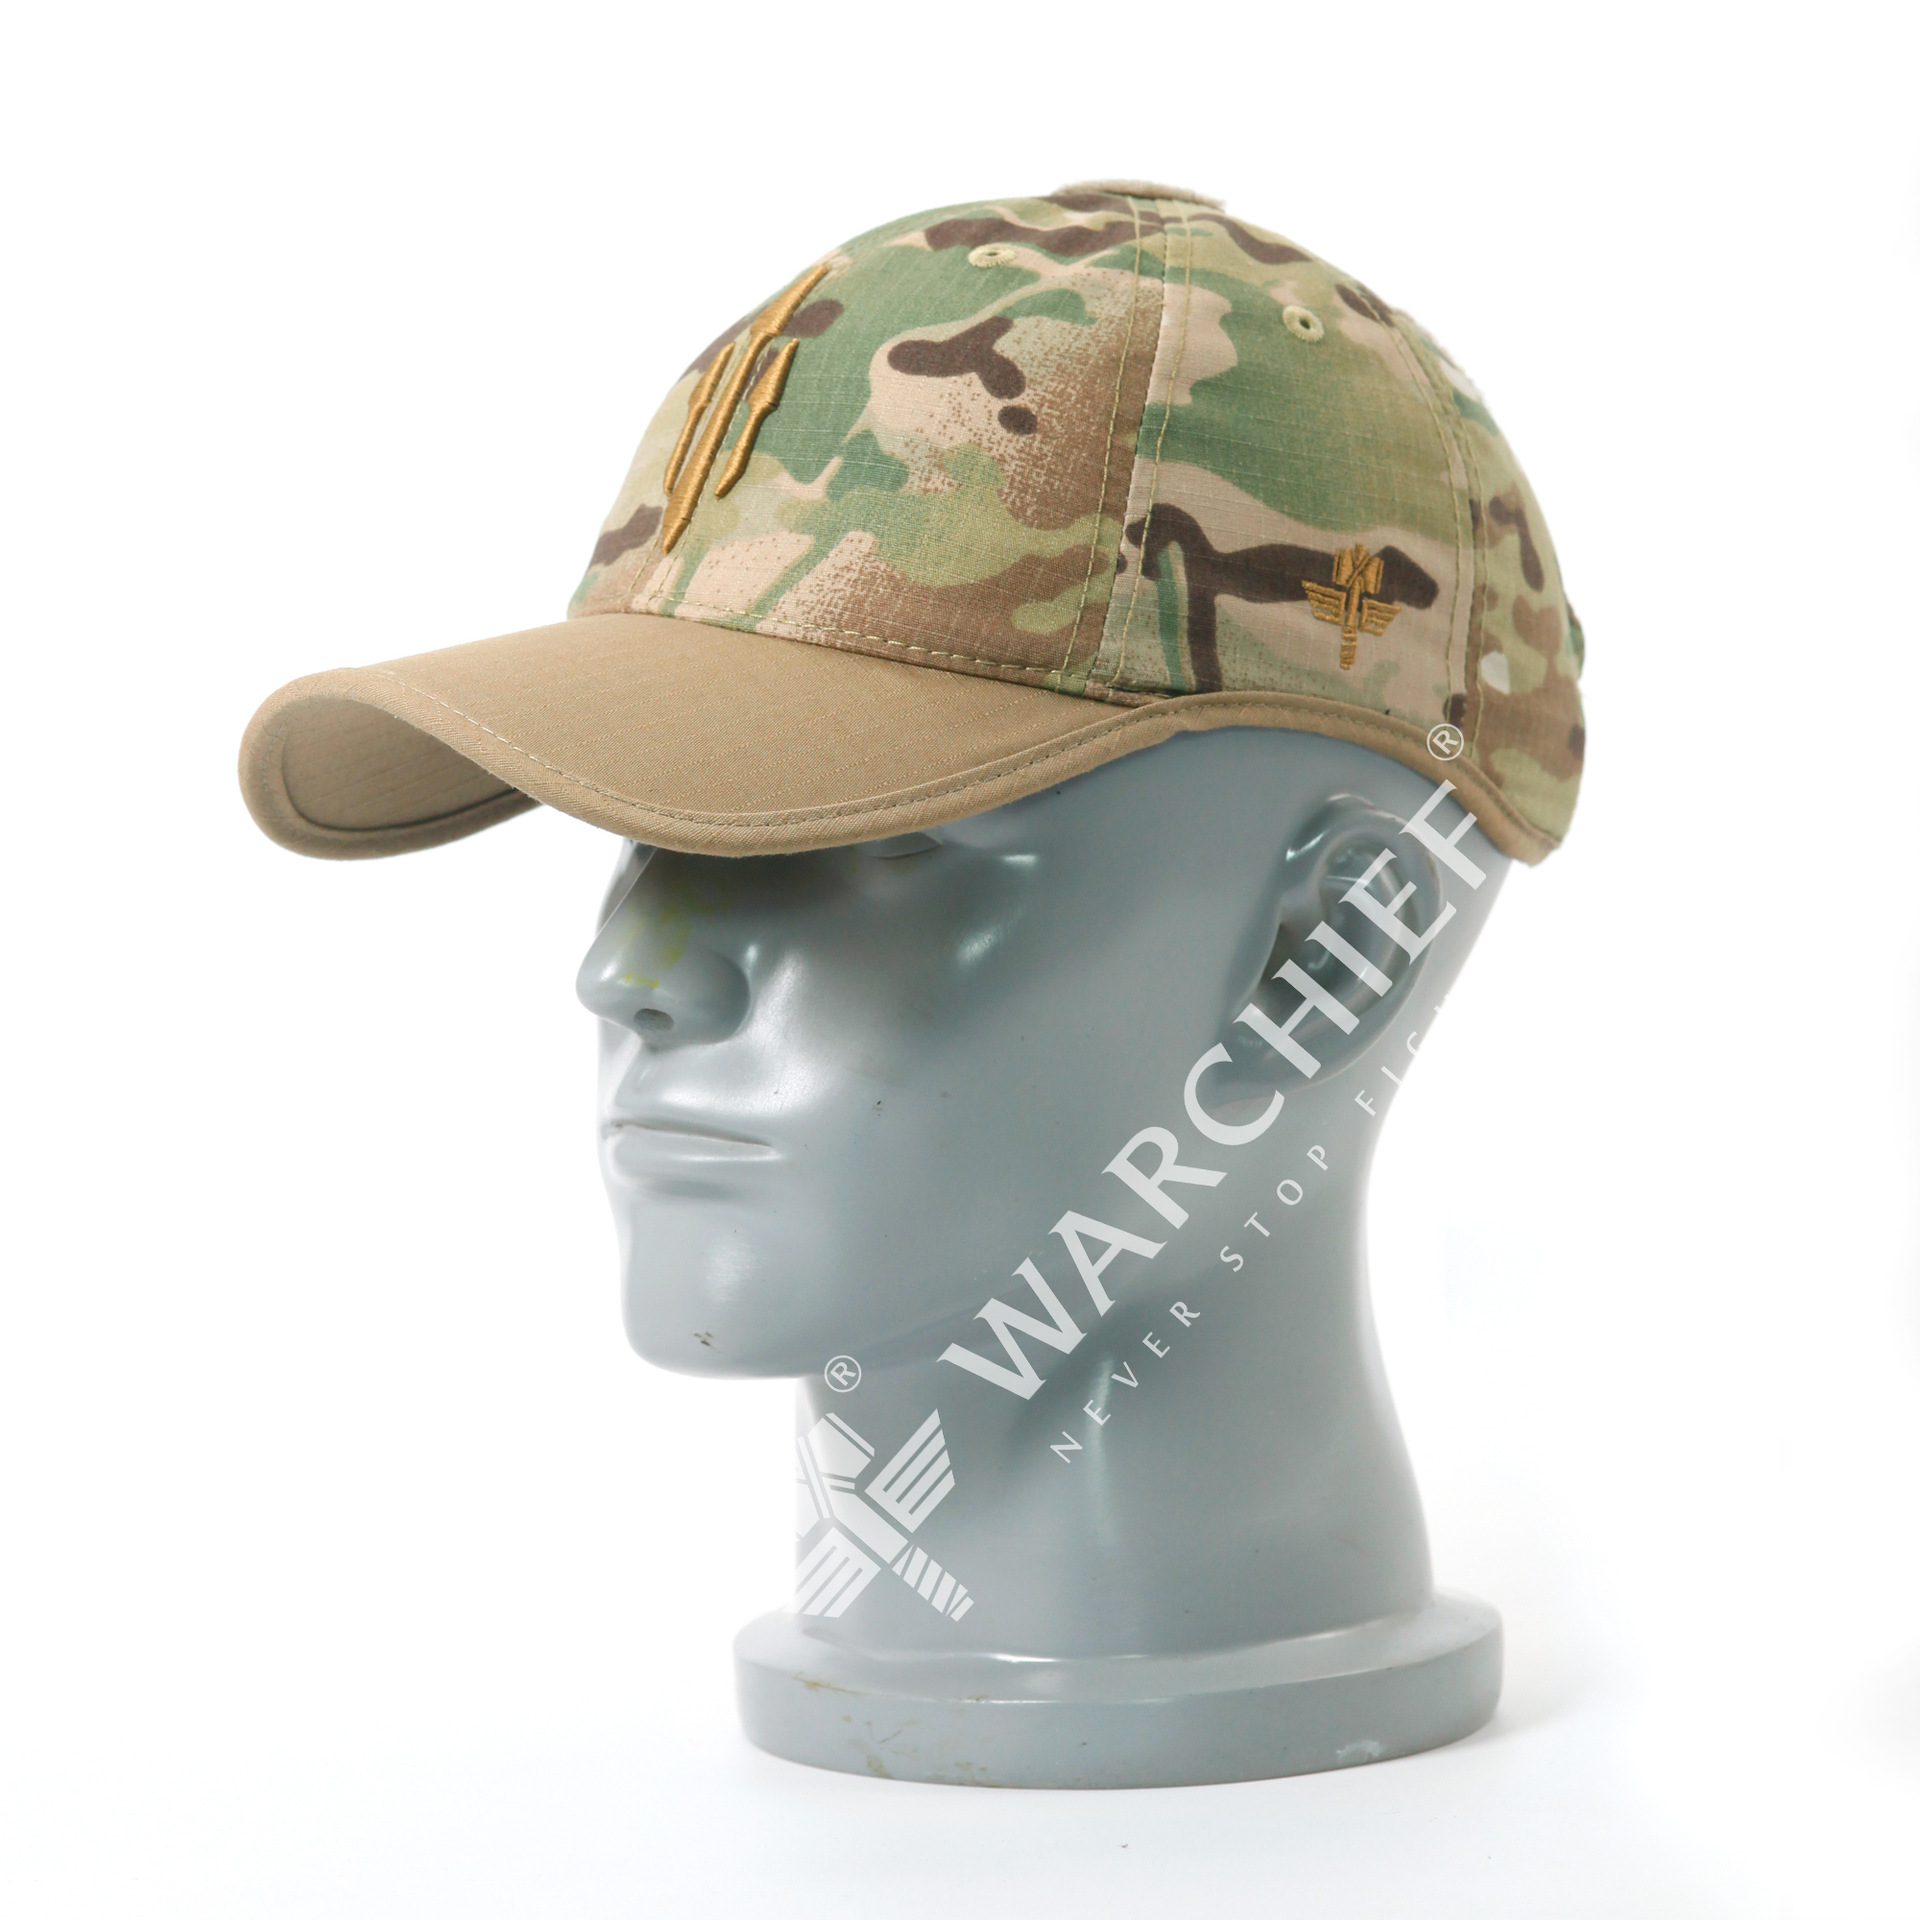 Emirates sea tactical baseball cap outdoor camouflage caps outdoor sports camouflage caps new men leisure fashion hat